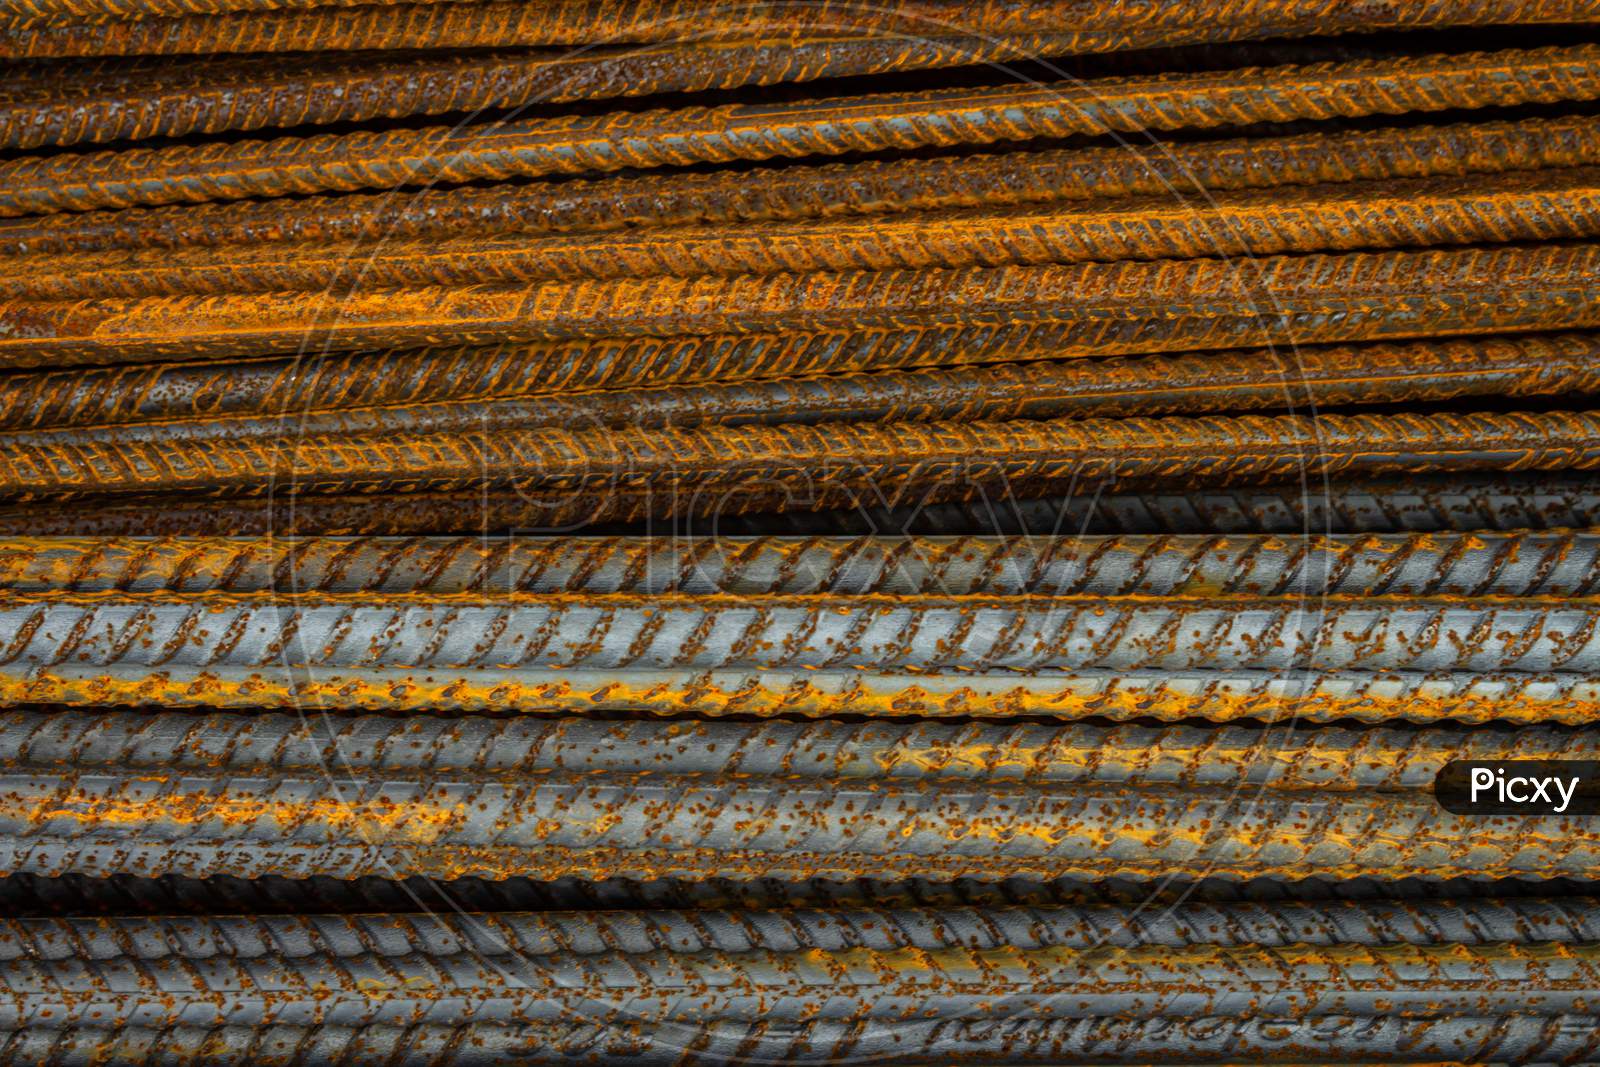 Rusty Steel Rods. Material For The Construction Of Buildings And Houses. Strong Metallic Material Forming A Repeating Pattern